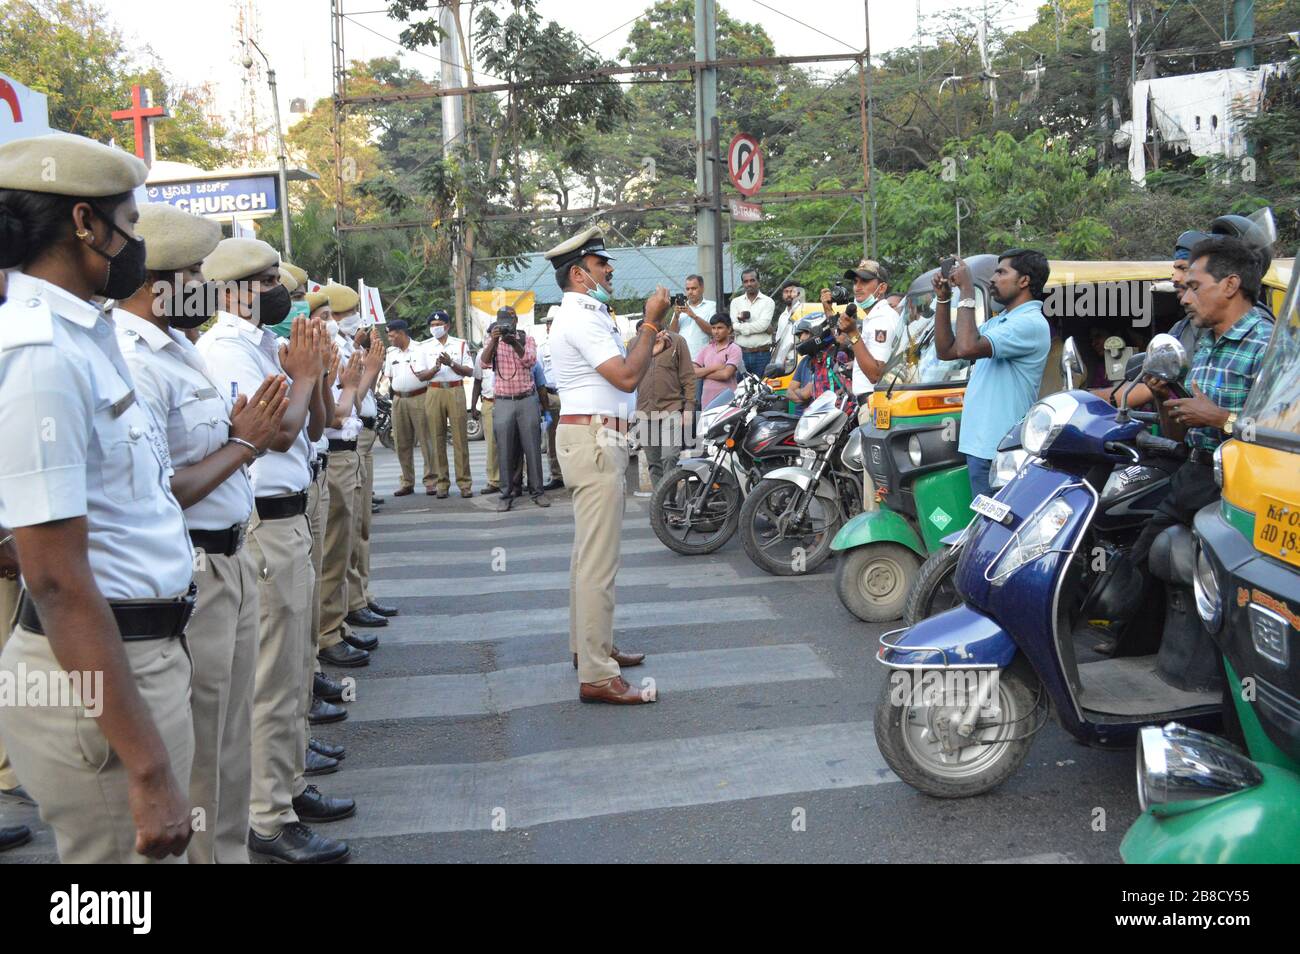 Bangalore, India. 21st Mar, 2020. Indian traffic police conduct an awareness campaign to prevent the spread of the novel coronavirus, in Bangalore, India, March 21, 2020. Credit: Str/Xinhua/Alamy Live News Stock Photo